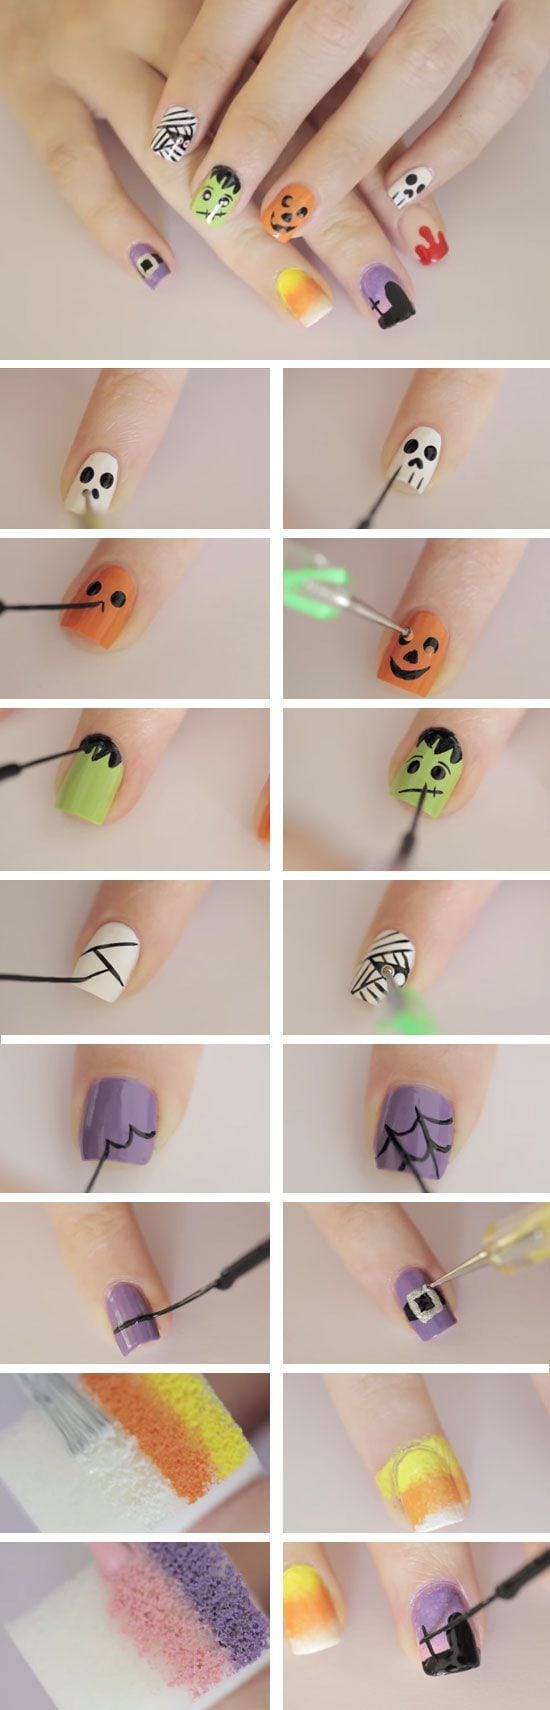 [ad_1]

Here's How You Should Do Your Nails for Halloween, According to Pinterest | Her Campus
Source by cowgirl27
[ad_2]
			
			…